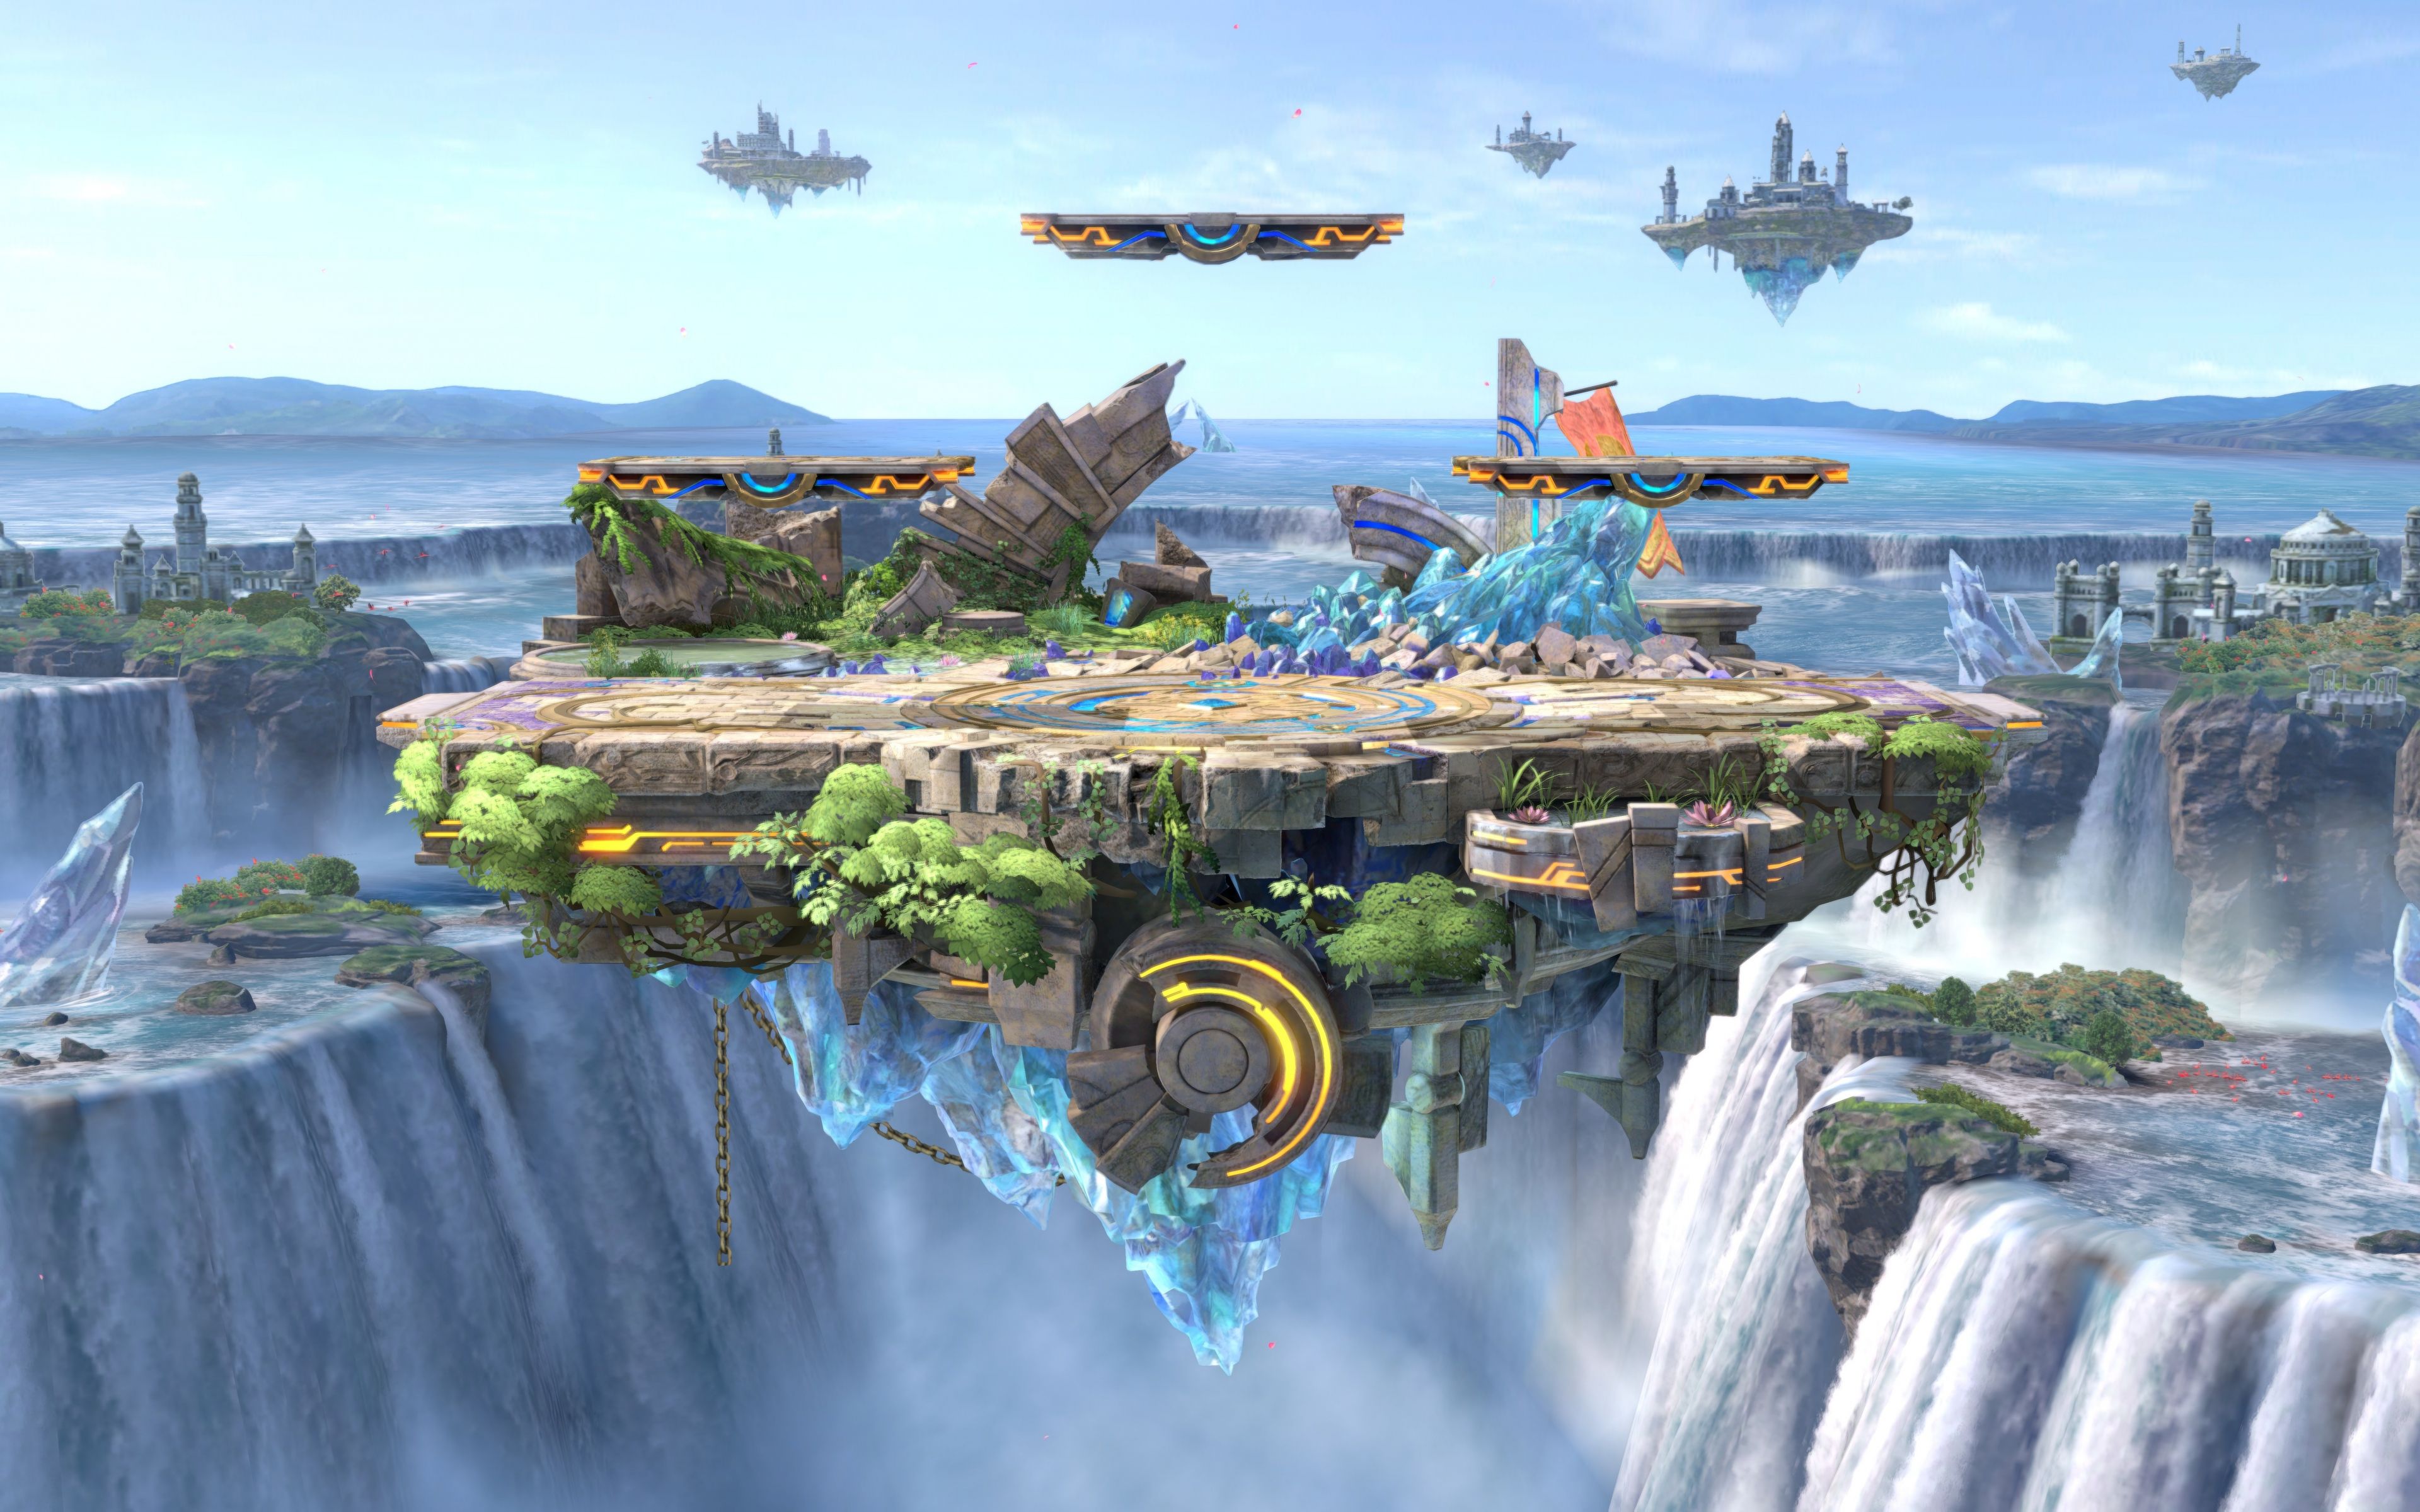 Download 3840x2400 wallpaper super smash bros. ultimate, video game, e3 flying island, 4k, ultra HD 16: widescreen, 3840x2400 HD image, background, 9026